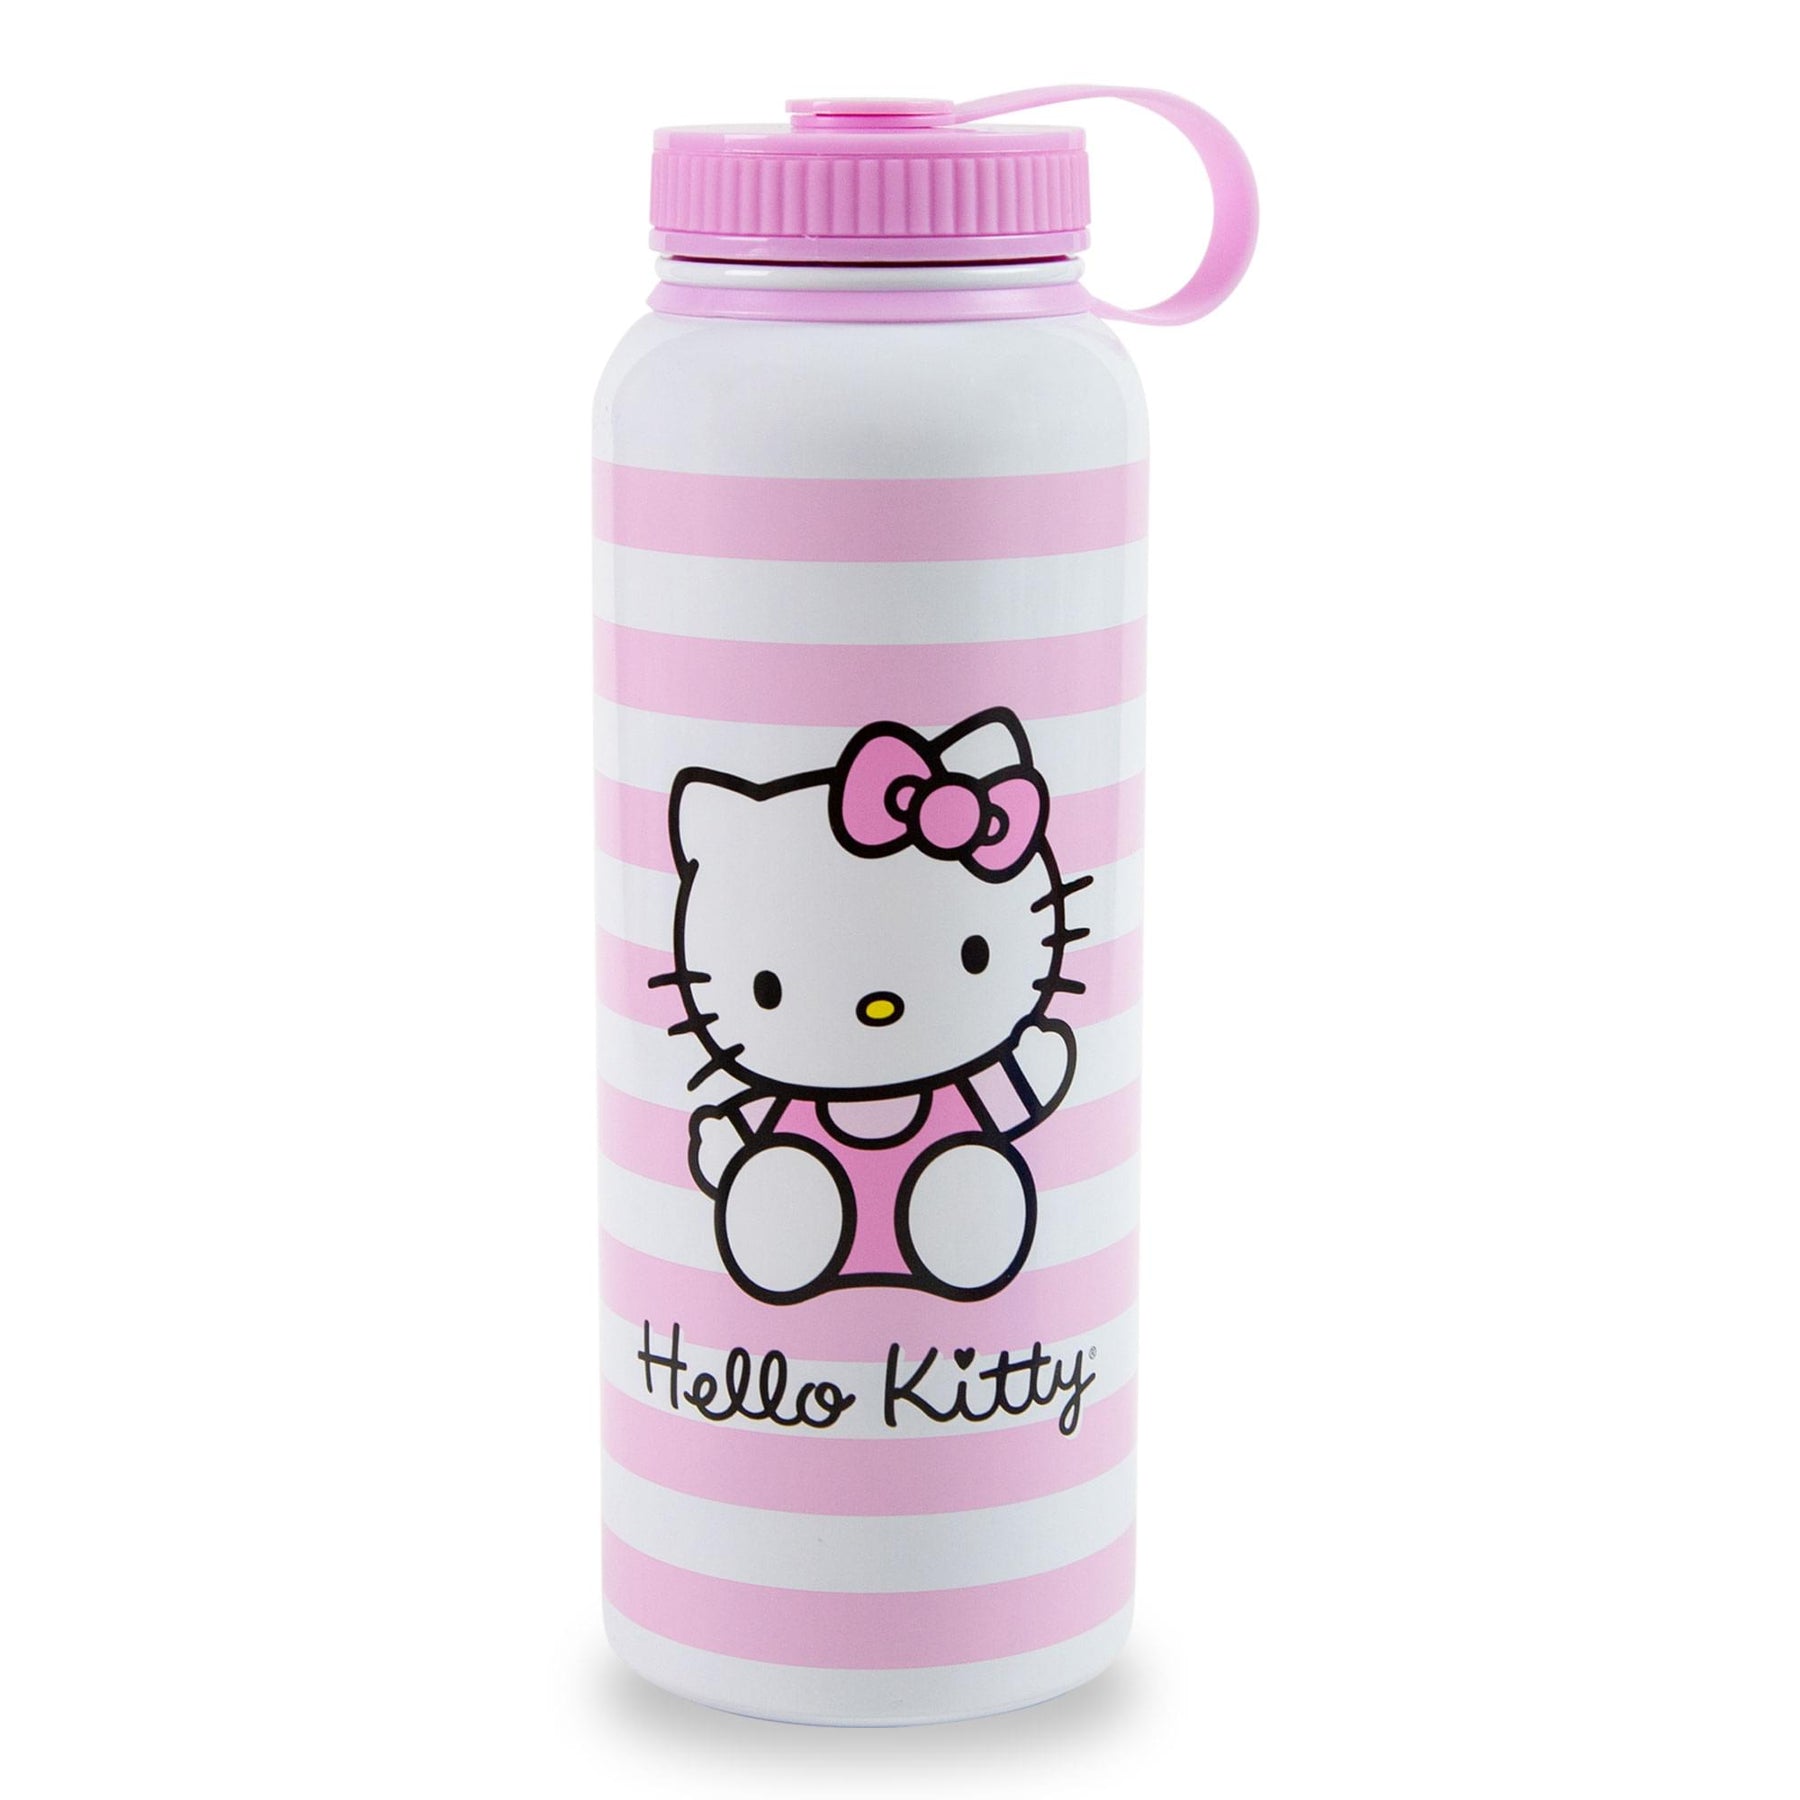 Sanrio Hello Kitty Pink Stainless Steel Water Bottle | Holds 42 Ounces